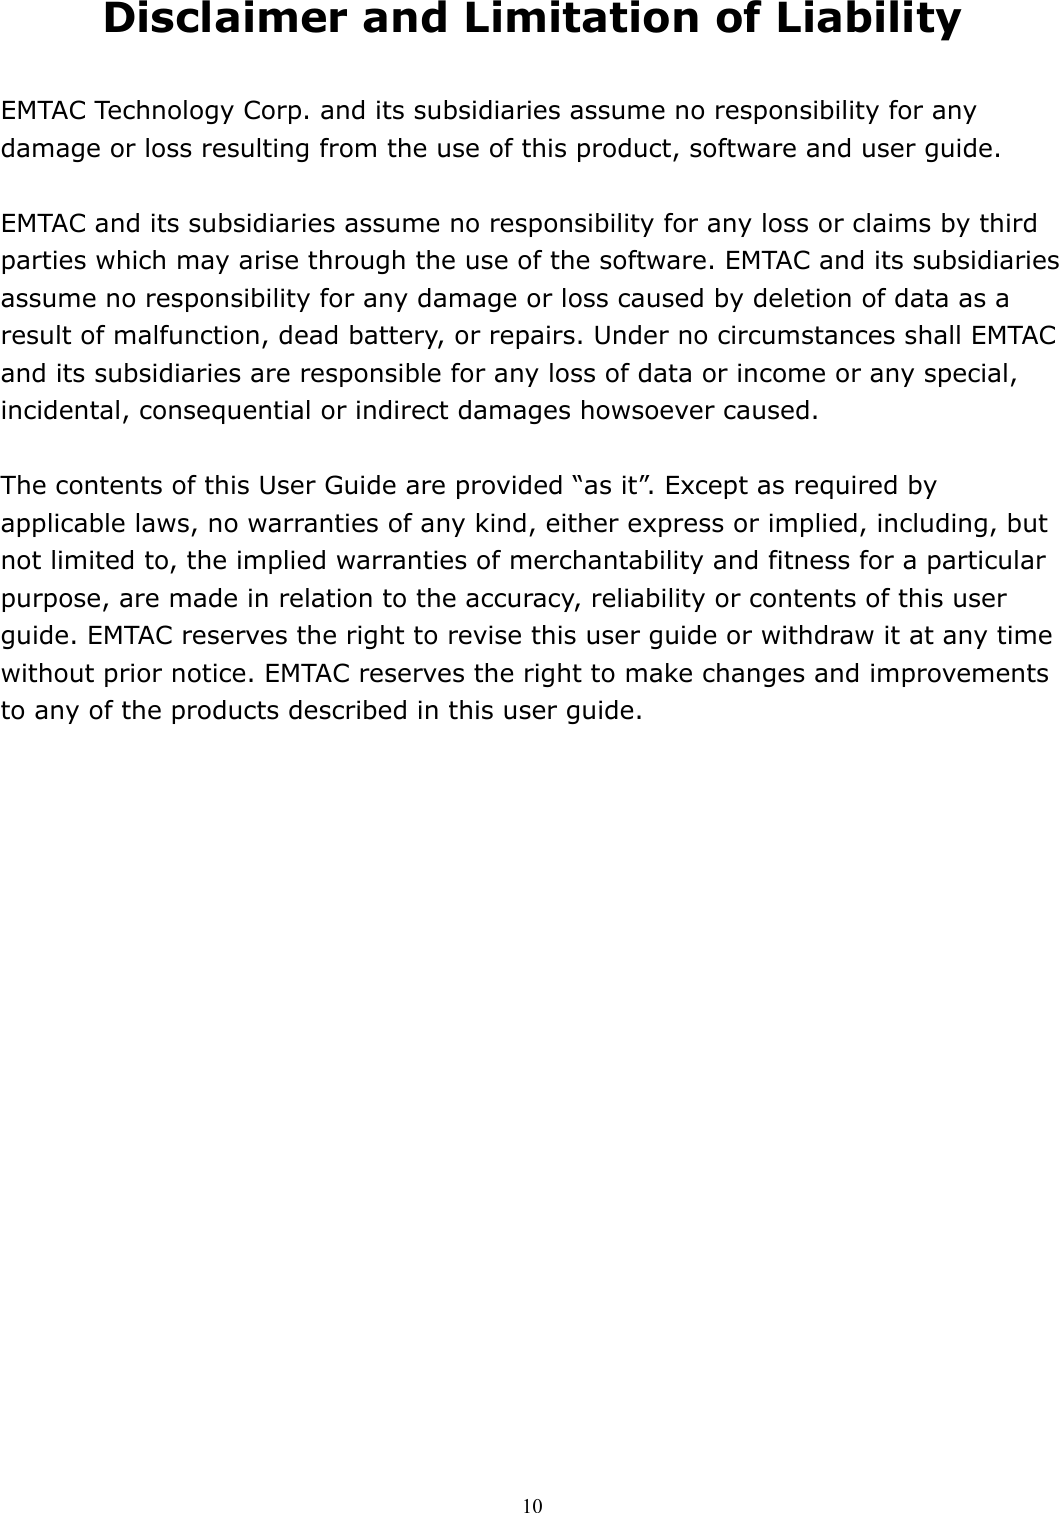  10 Disclaimer and Limitation of Liability  EMTAC Technology Corp. and its subsidiaries assume no responsibility for any damage or loss resulting from the use of this product, software and user guide.  EMTAC and its subsidiaries assume no responsibility for any loss or claims by third parties which may arise through the use of the software. EMTAC and its subsidiaries assume no responsibility for any damage or loss caused by deletion of data as a result of malfunction, dead battery, or repairs. Under no circumstances shall EMTAC and its subsidiaries are responsible for any loss of data or income or any special, incidental, consequential or indirect damages howsoever caused.  The contents of this User Guide are provided “as it”. Except as required by applicable laws, no warranties of any kind, either express or implied, including, but not limited to, the implied warranties of merchantability and fitness for a particular purpose, are made in relation to the accuracy, reliability or contents of this user guide. EMTAC reserves the right to revise this user guide or withdraw it at any time without prior notice. EMTAC reserves the right to make changes and improvements to any of the products described in this user guide.  